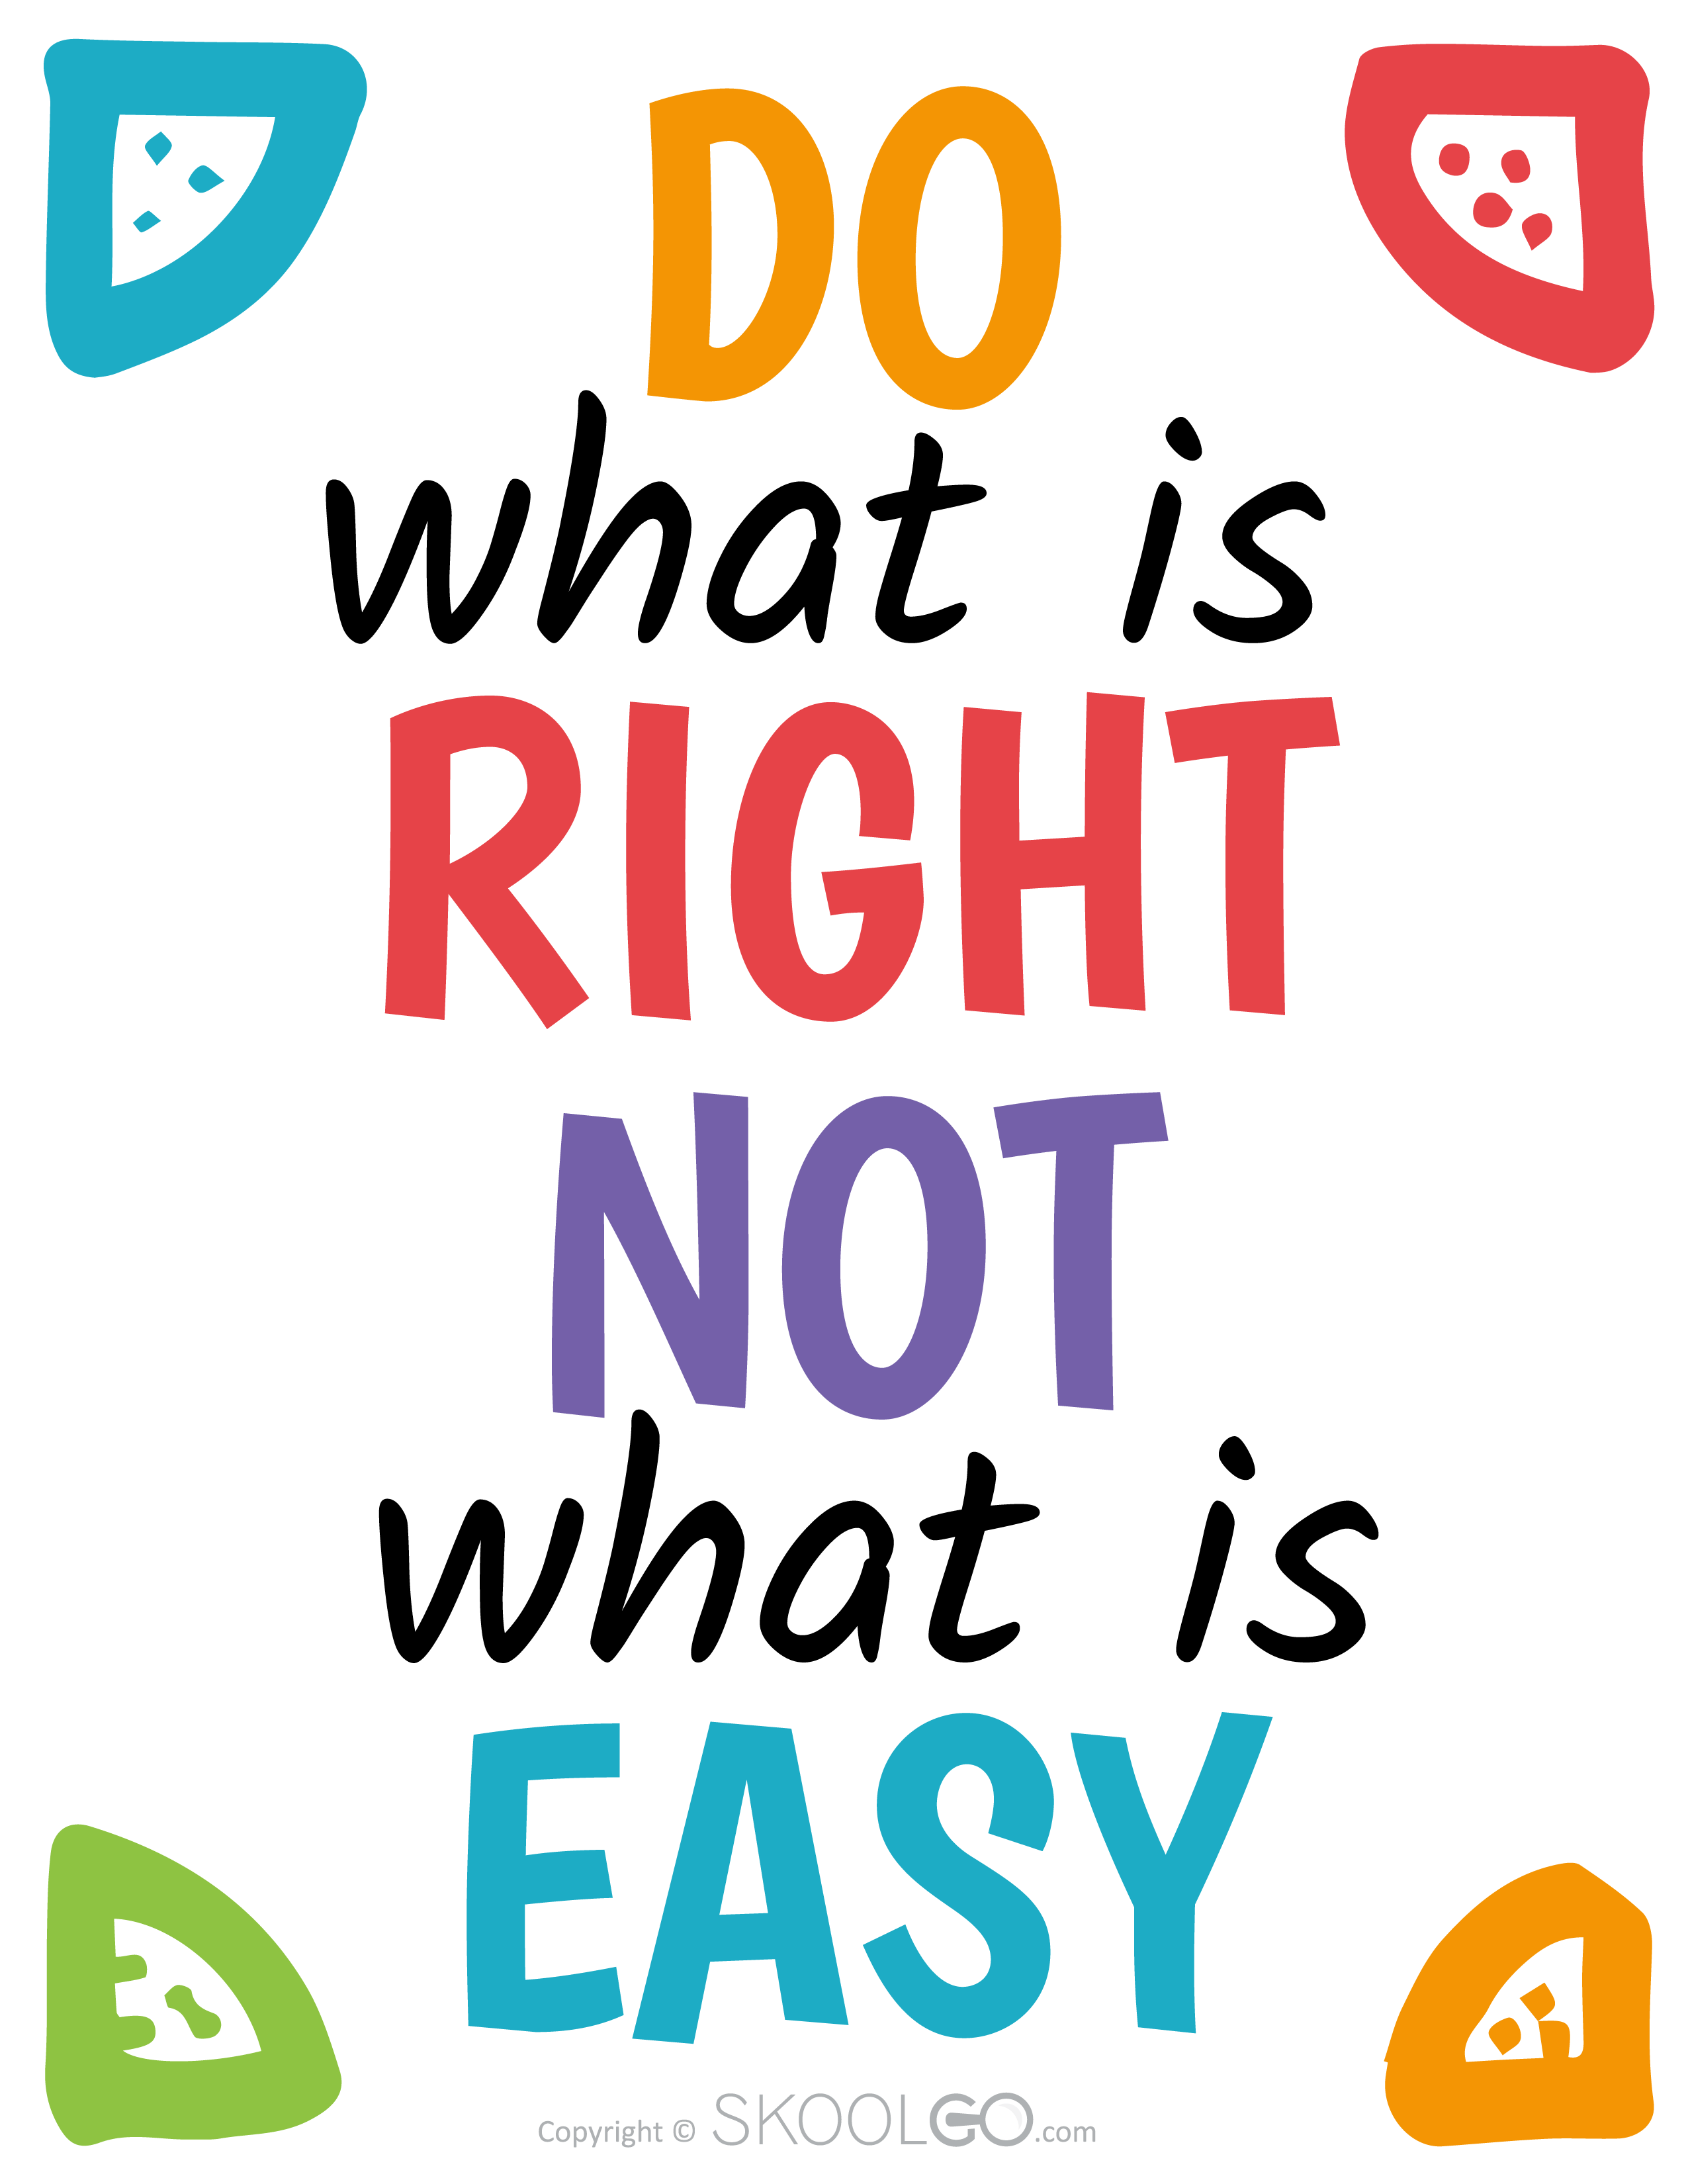 Do What Is Right Not What Is Easy - Free Poster